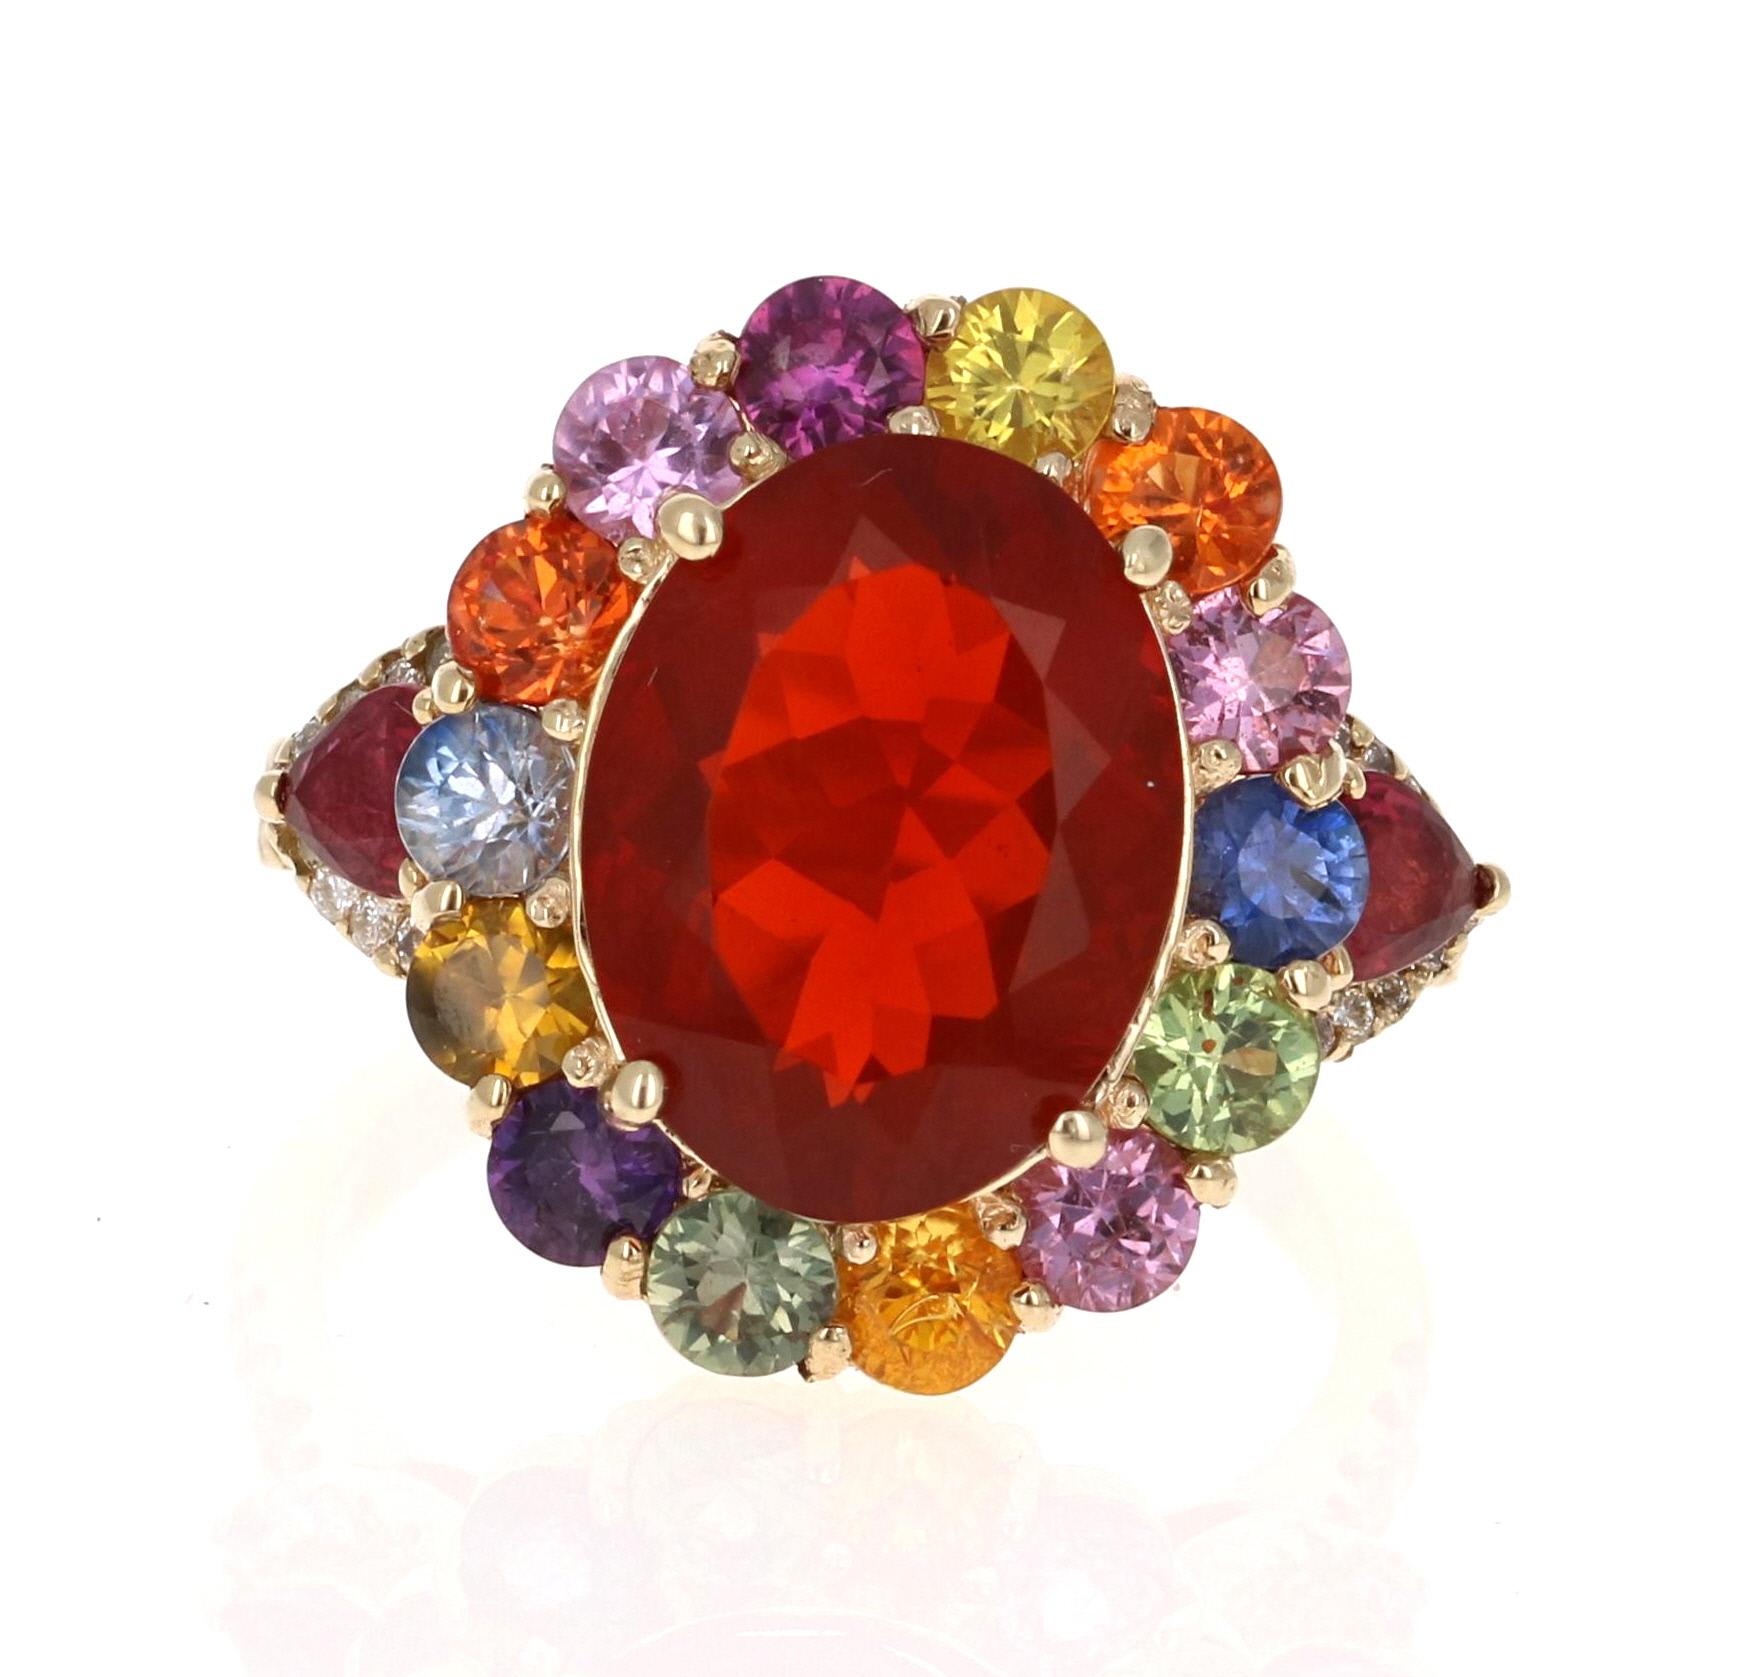 Super gorgeous and uniquely designed 6.44 Carat Fire Opal and Multi-Colored Sapphire and Diamond 14K Yellow Gold Cocktail Ring!

This ring has a 3.48 carat Oval Cut Fire Opal as its center stone and is elegantly surrounded by 14 Round Cut